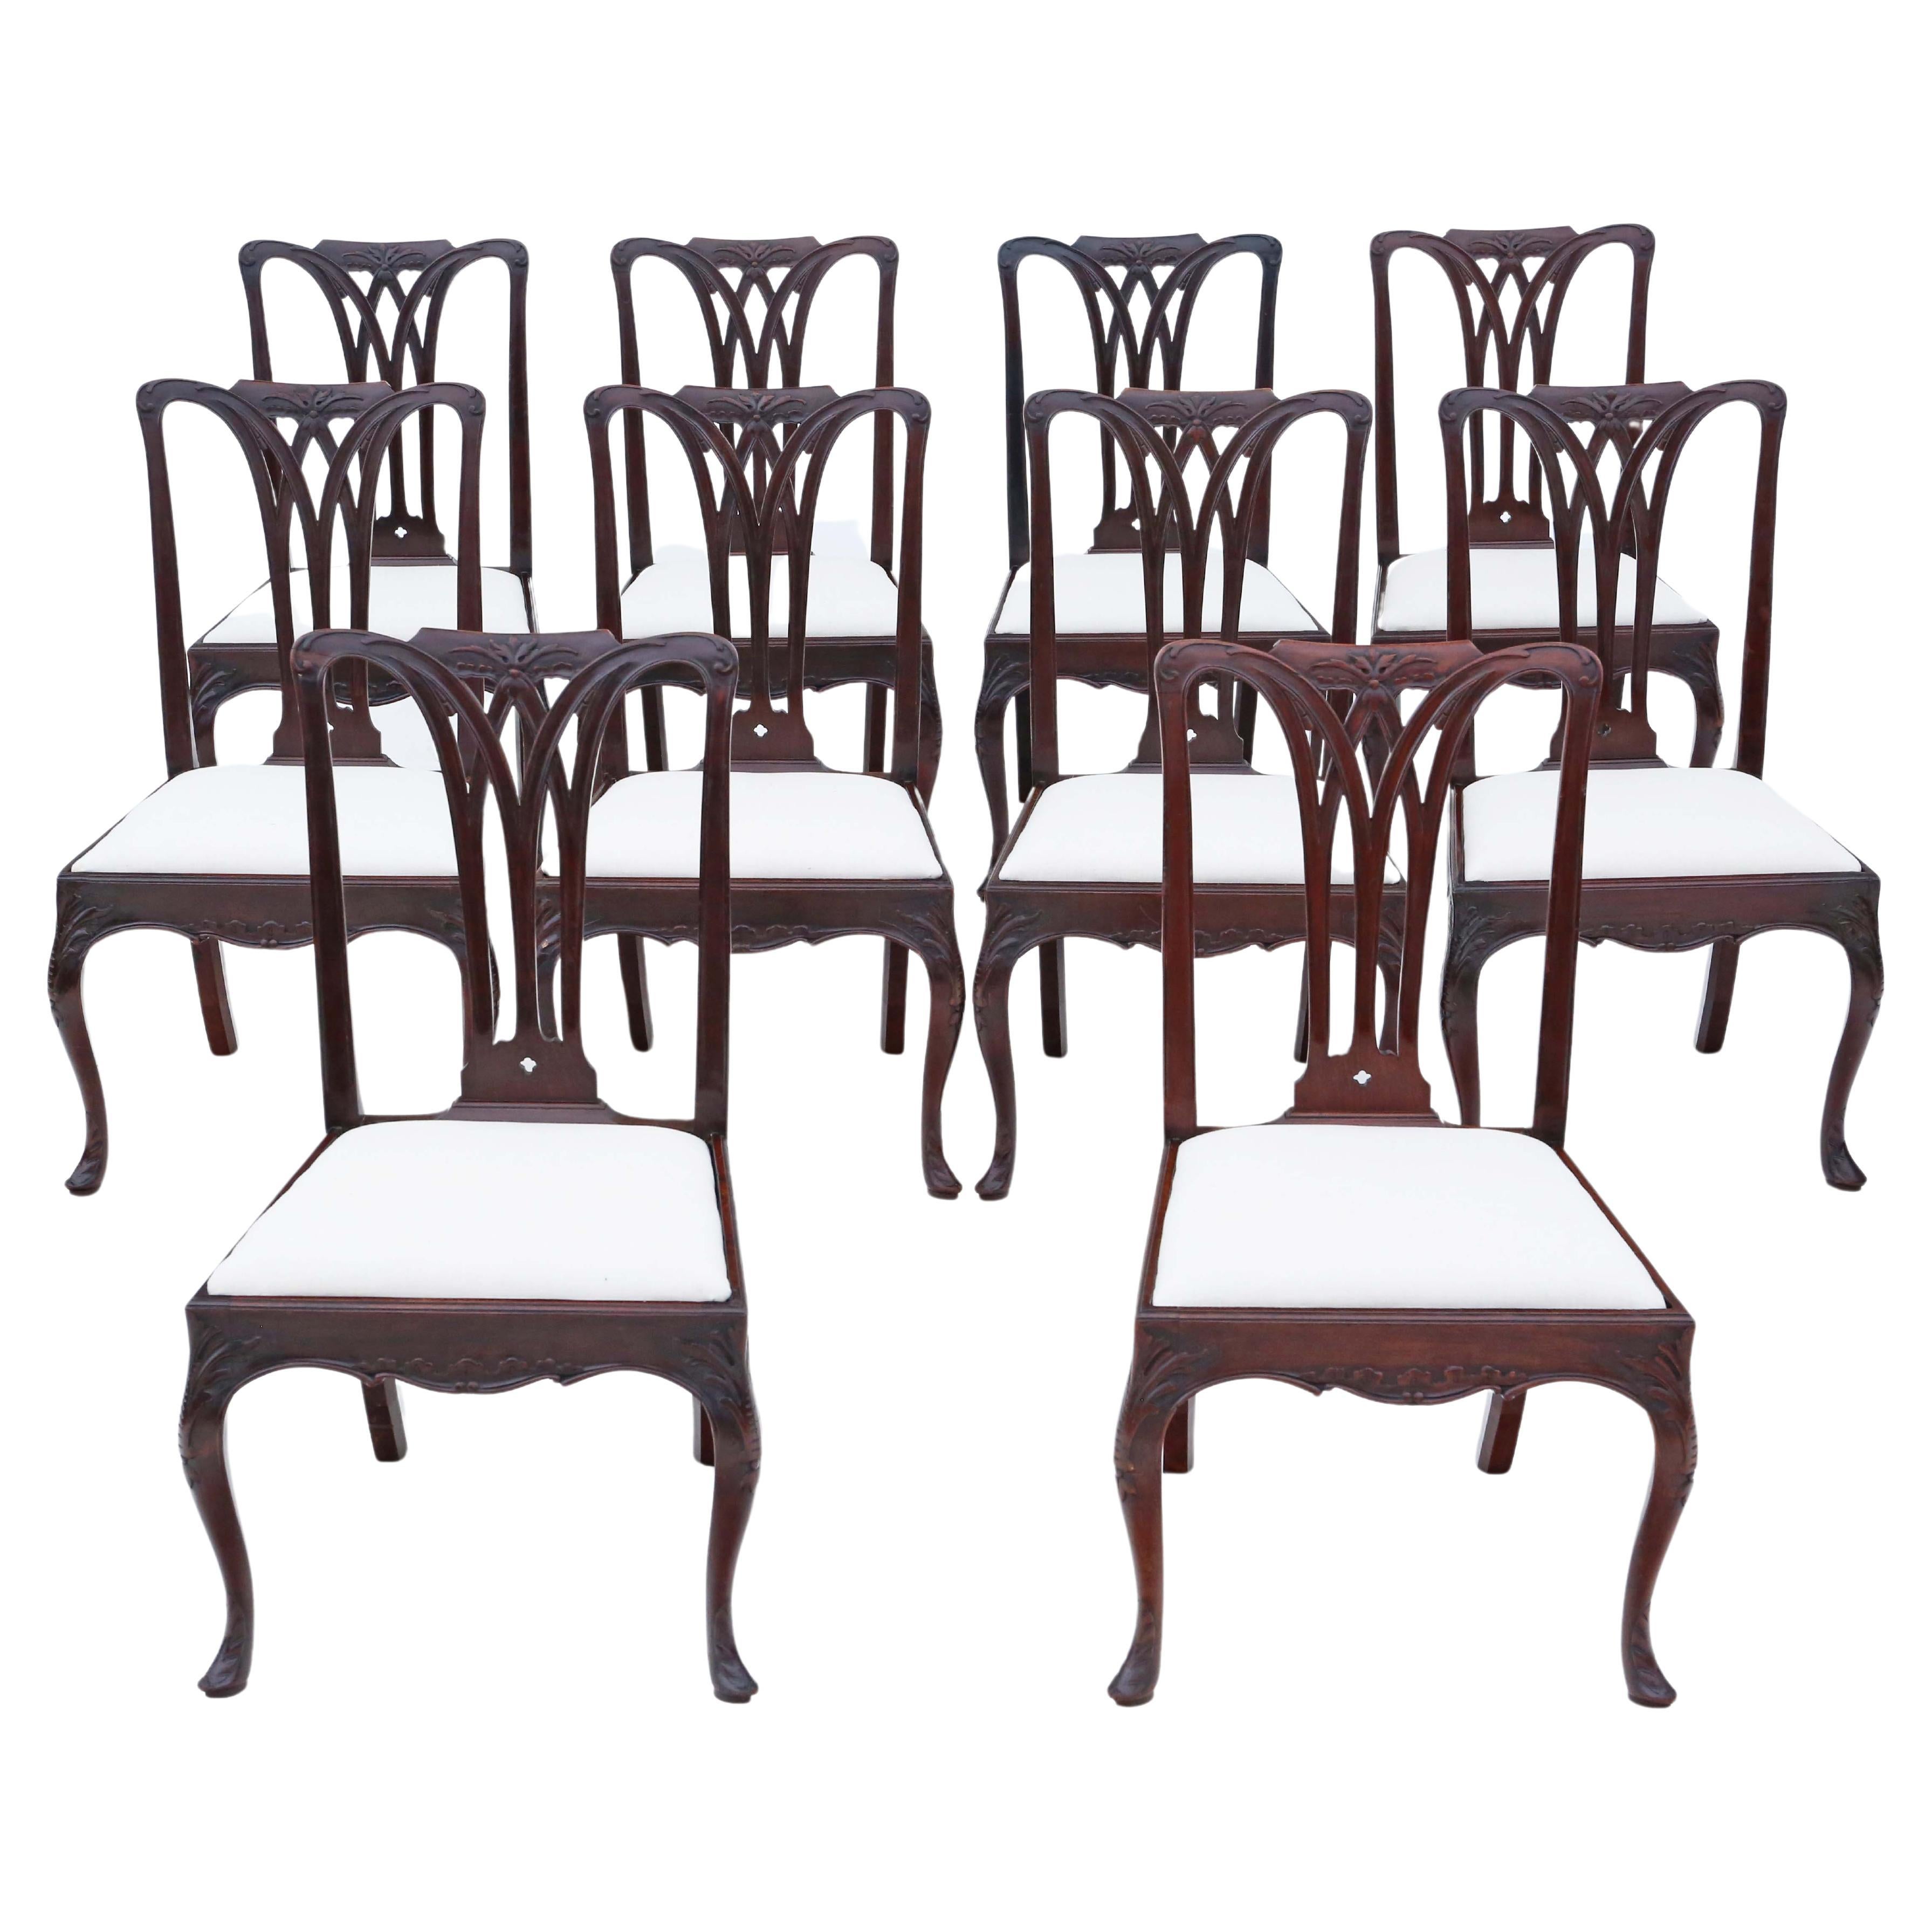 Antique 18th Century Georgian Mahogany Dining Chairs: Set of 10, High Quality For Sale